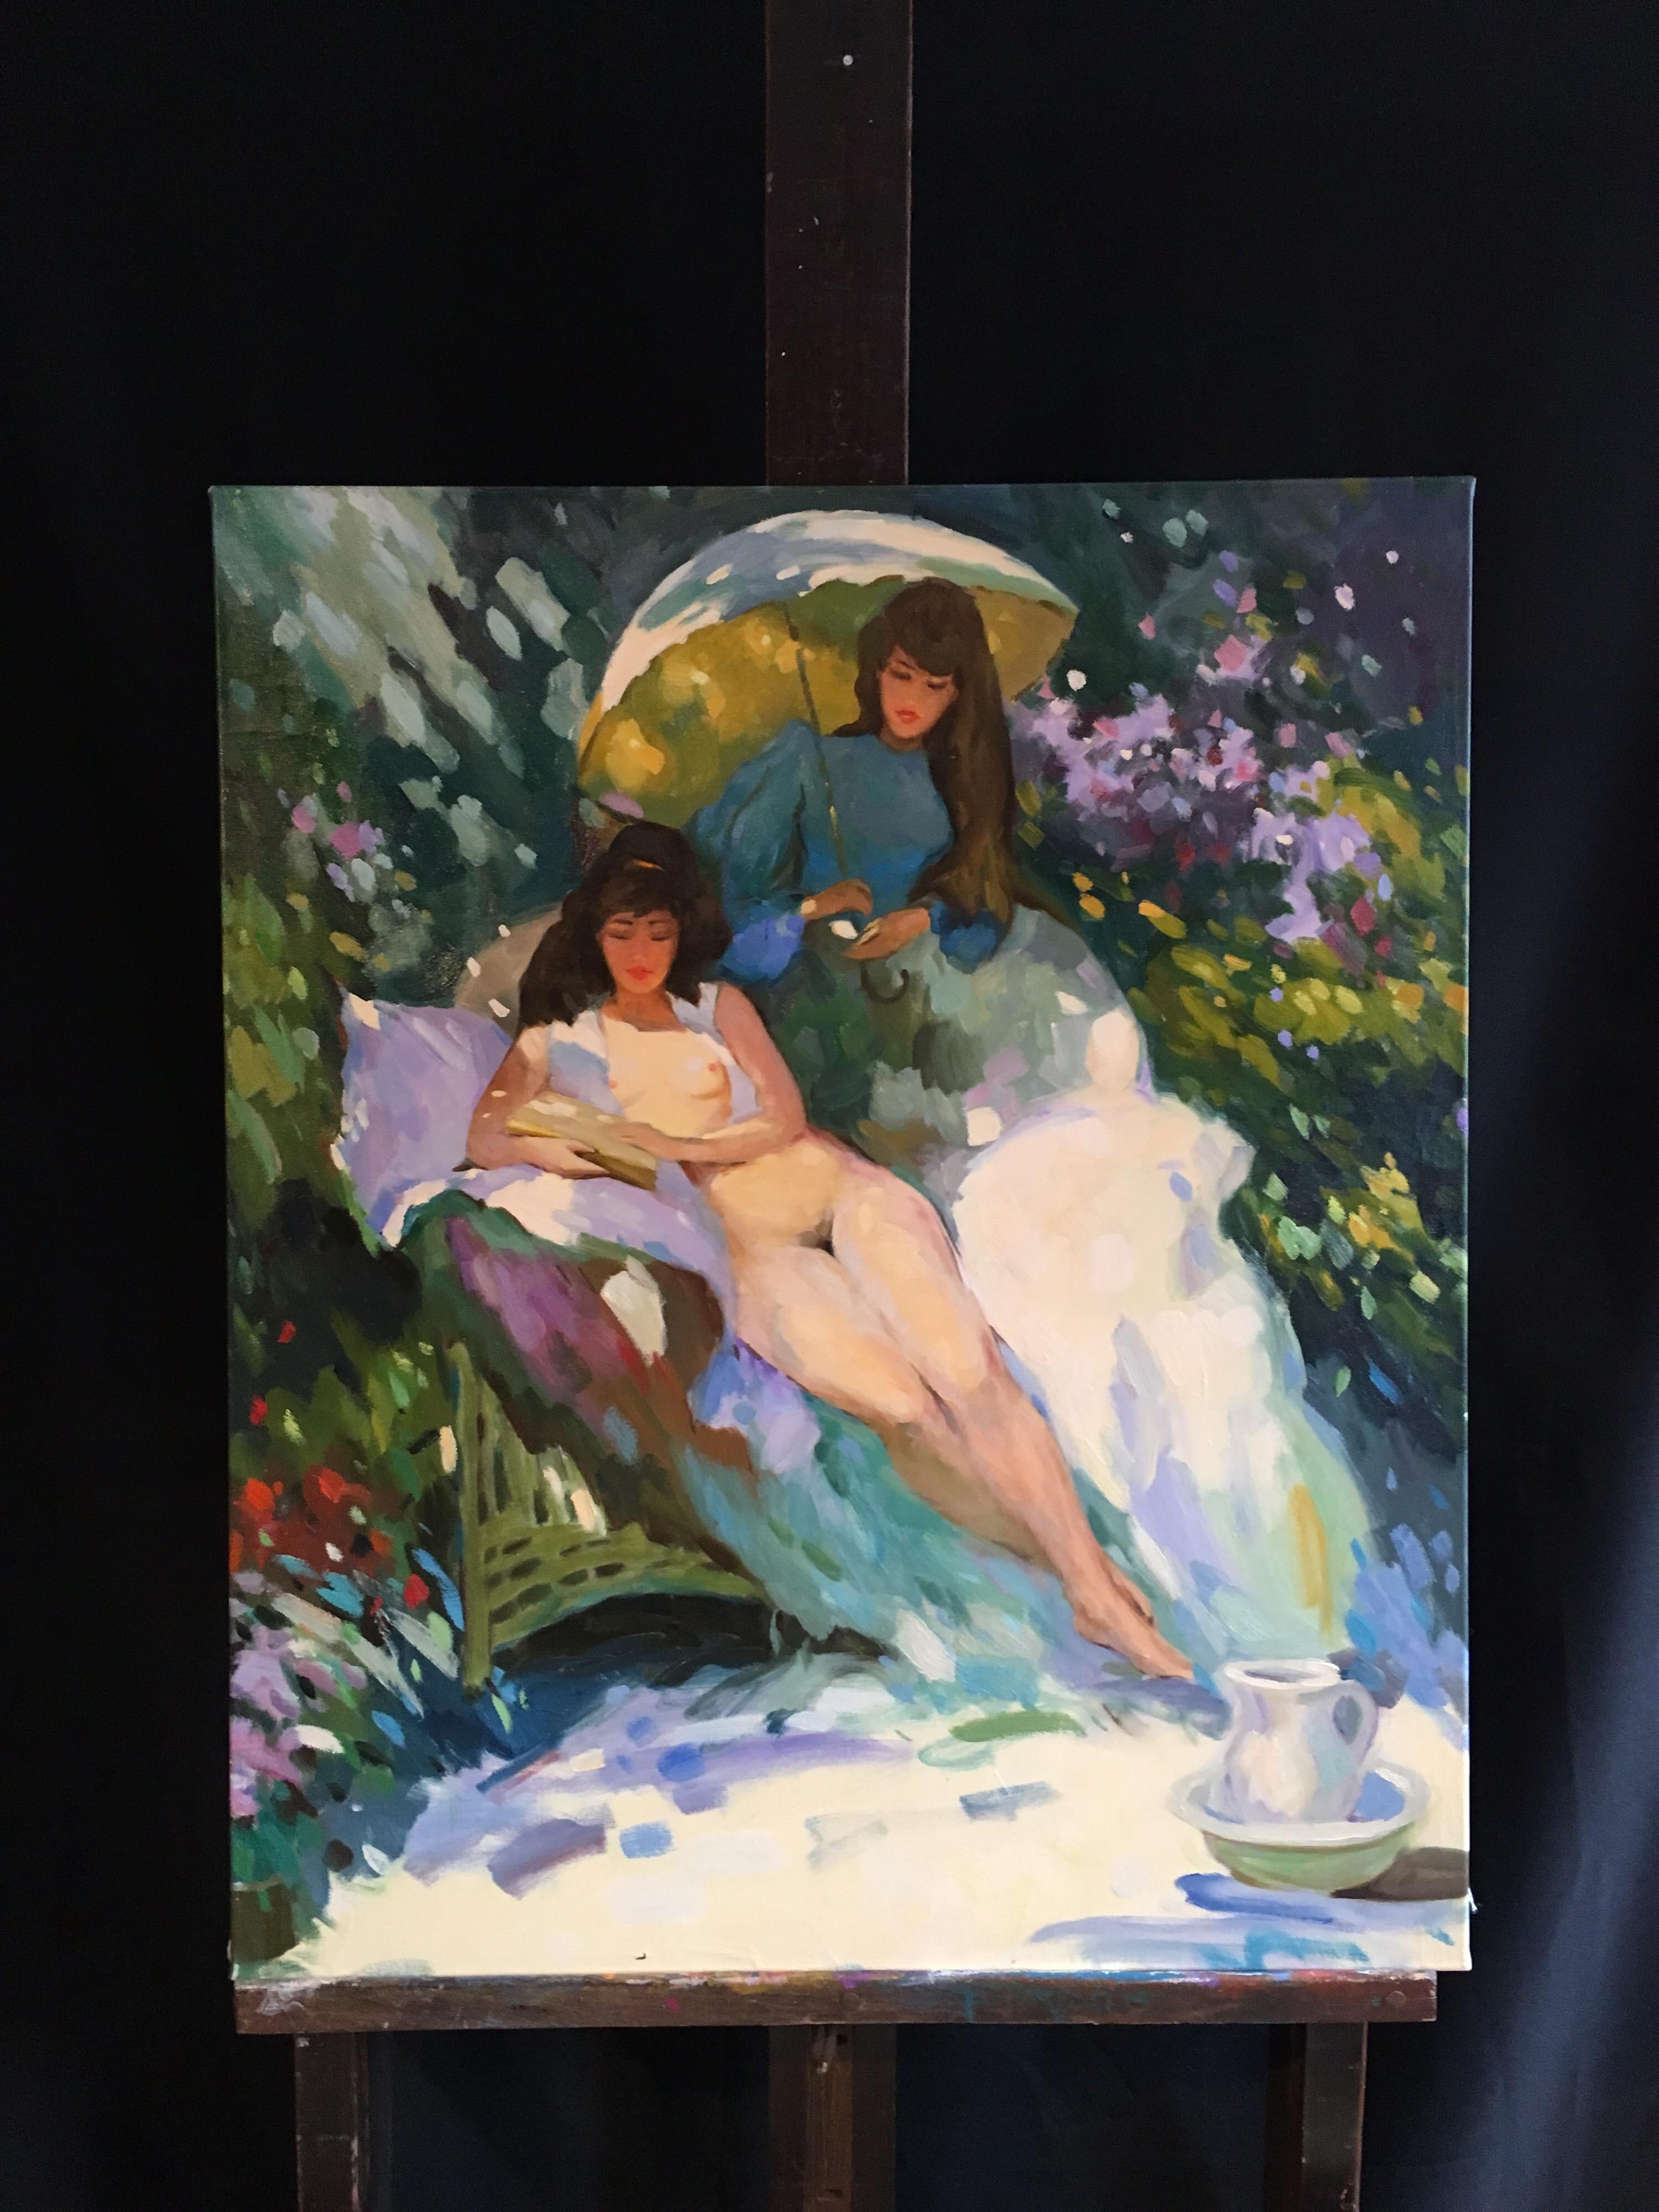 Large Impressionist Nude, Floral Scene, Original Oil Painting - Black Figurative Painting by Unknown